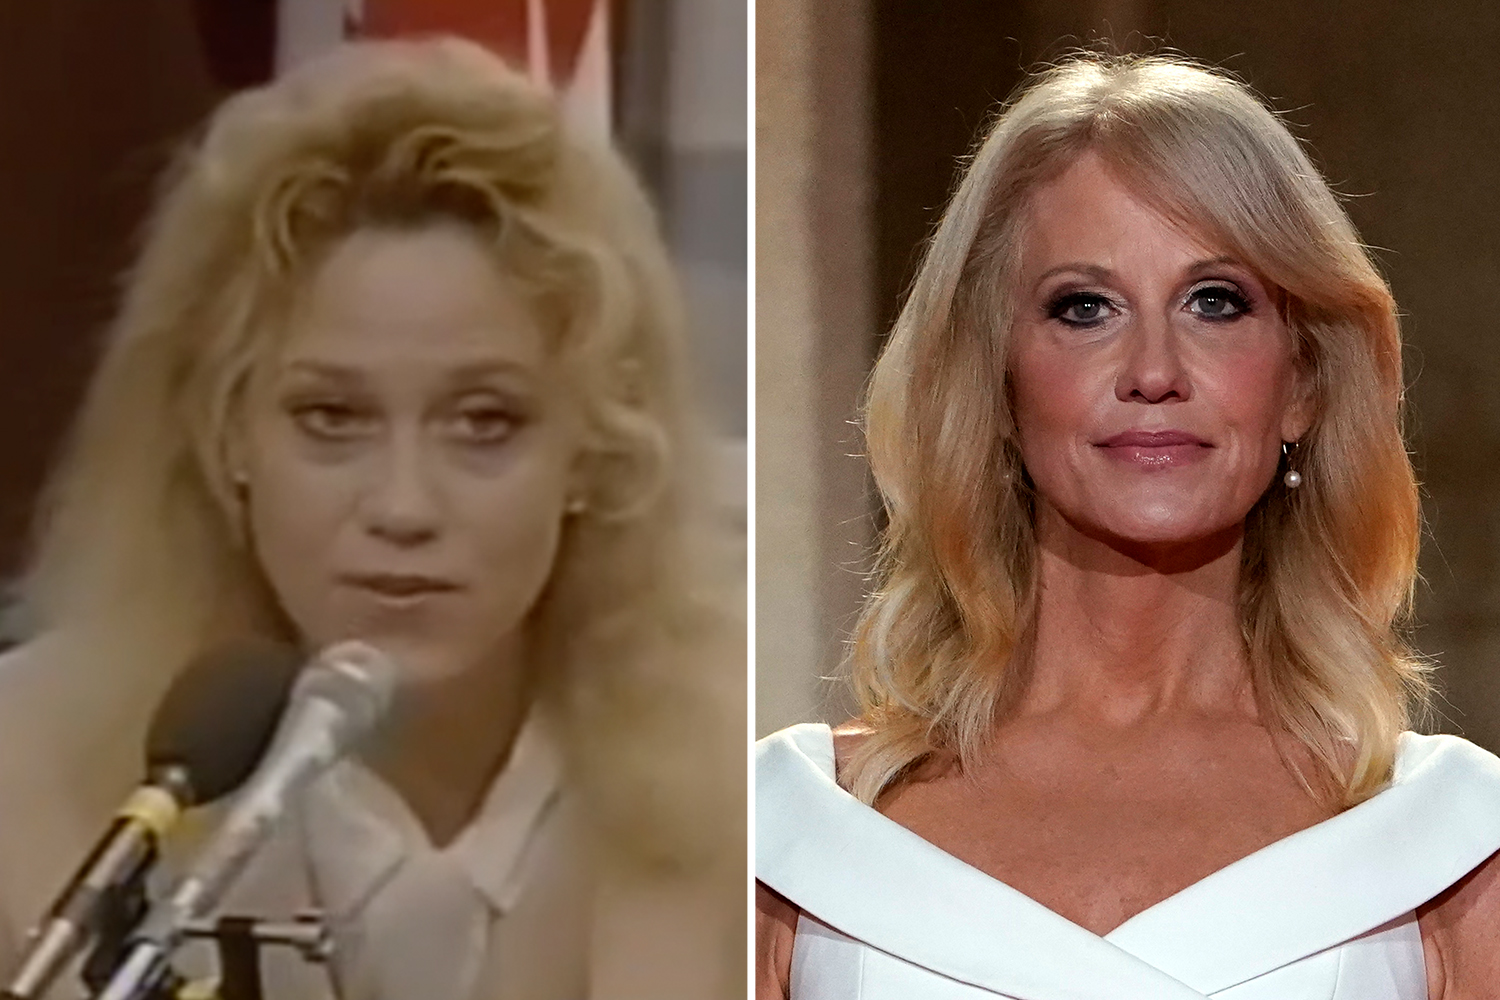 Kellyanne Conway looks unrecognizable in throwback photos before